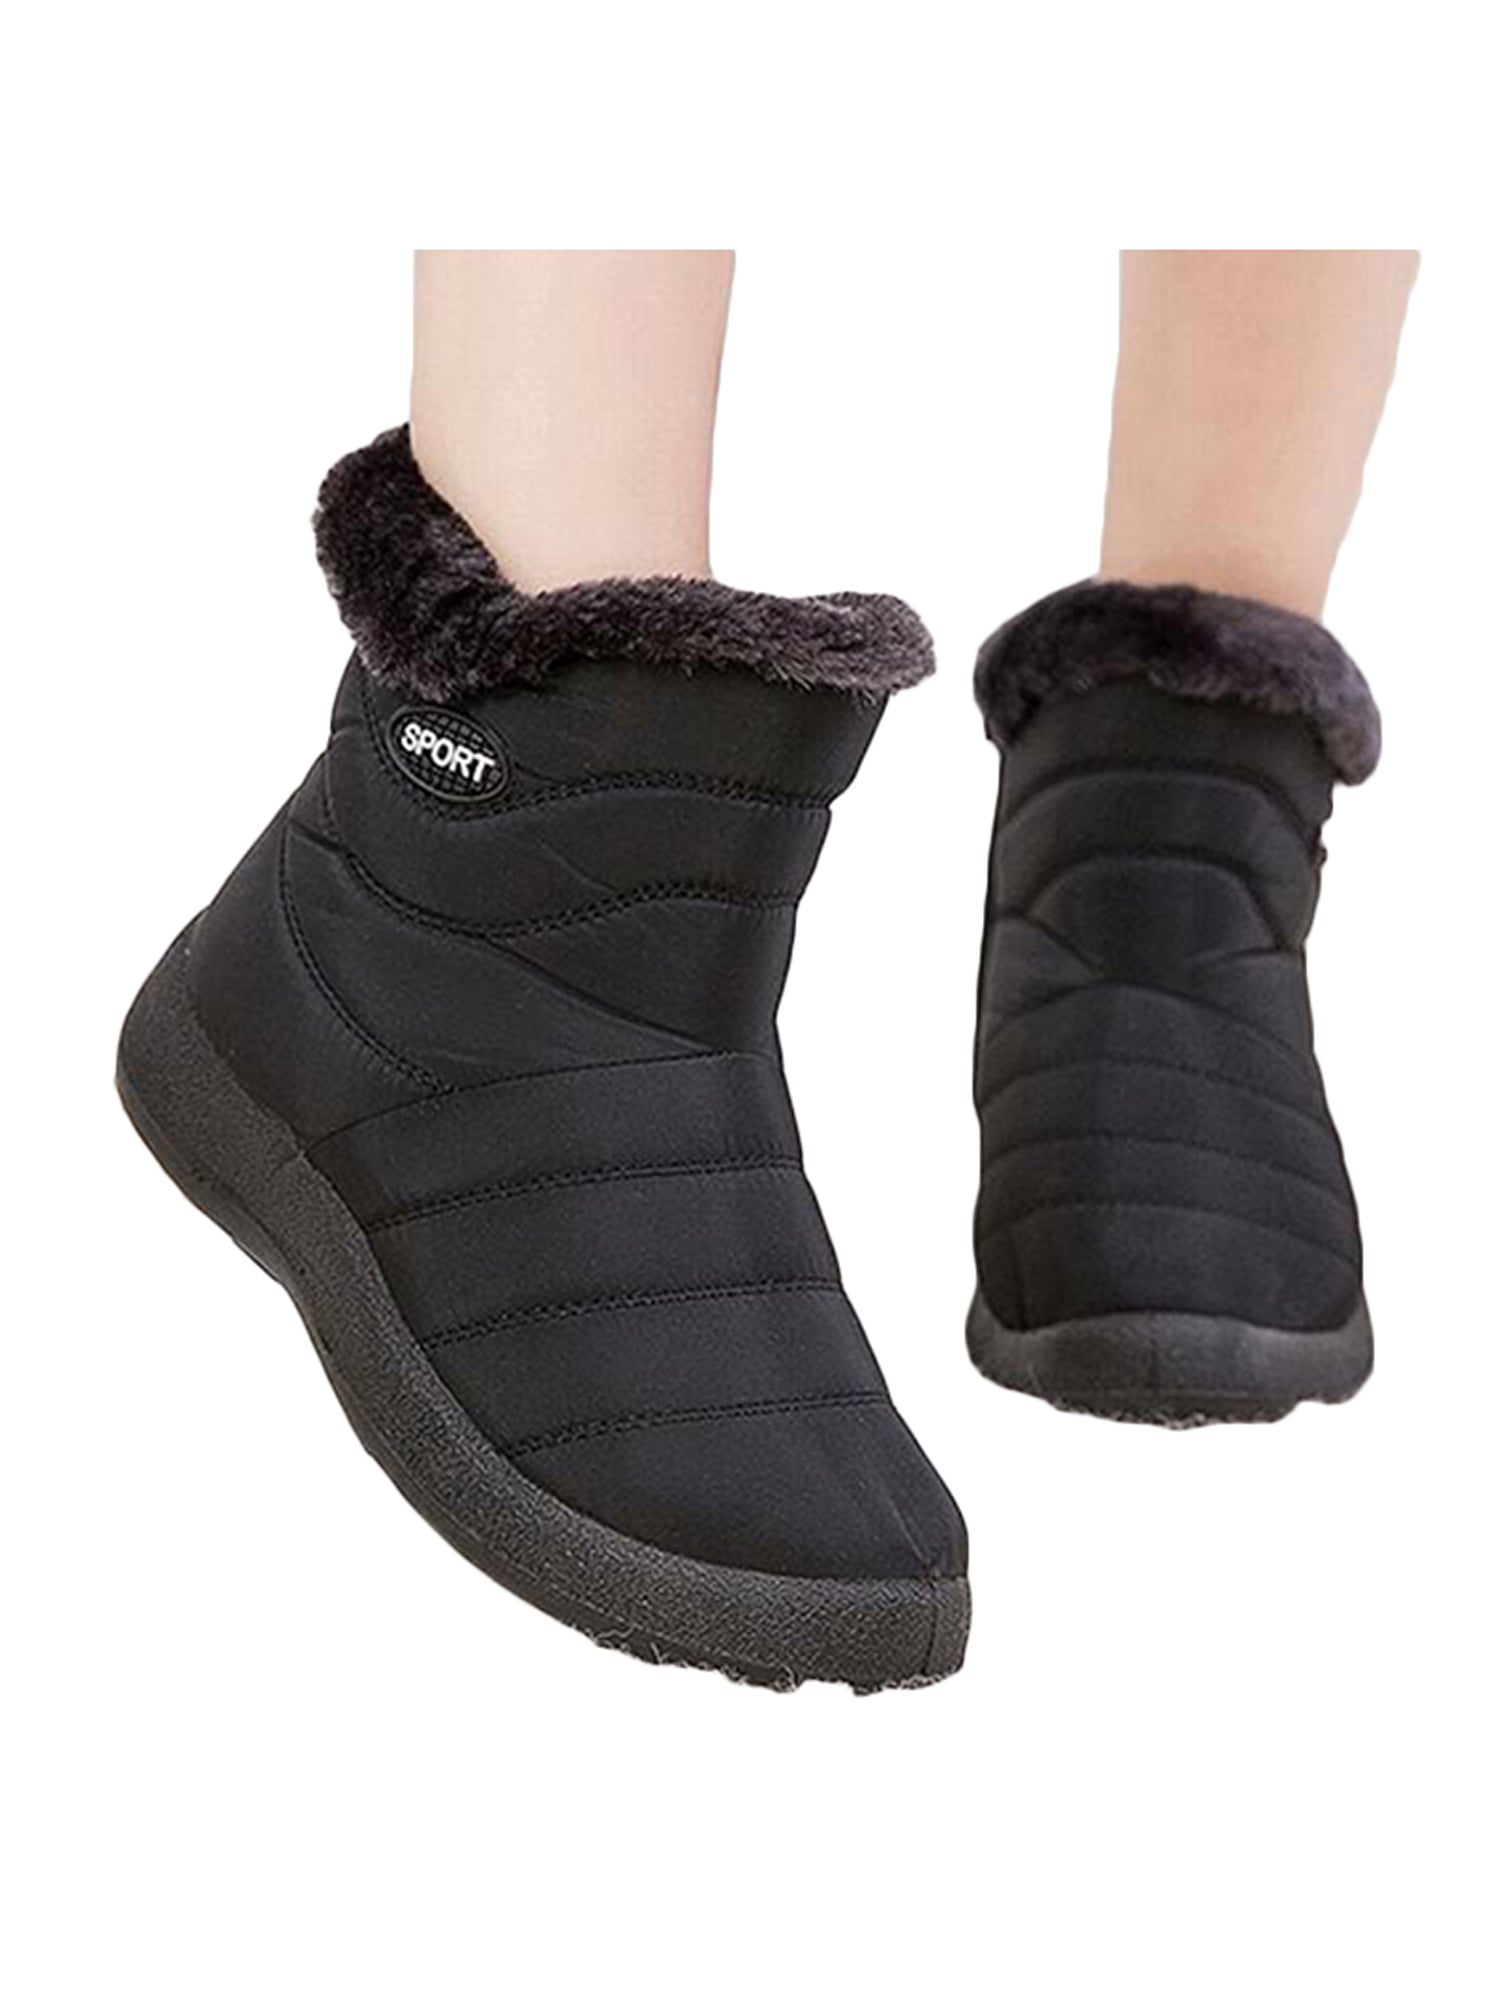 Winter Snow Boots for Women Keep Warm Fur Lined Combat Boot Non-Slip Suede Ankle Booties Outdoor Hiking Shoes